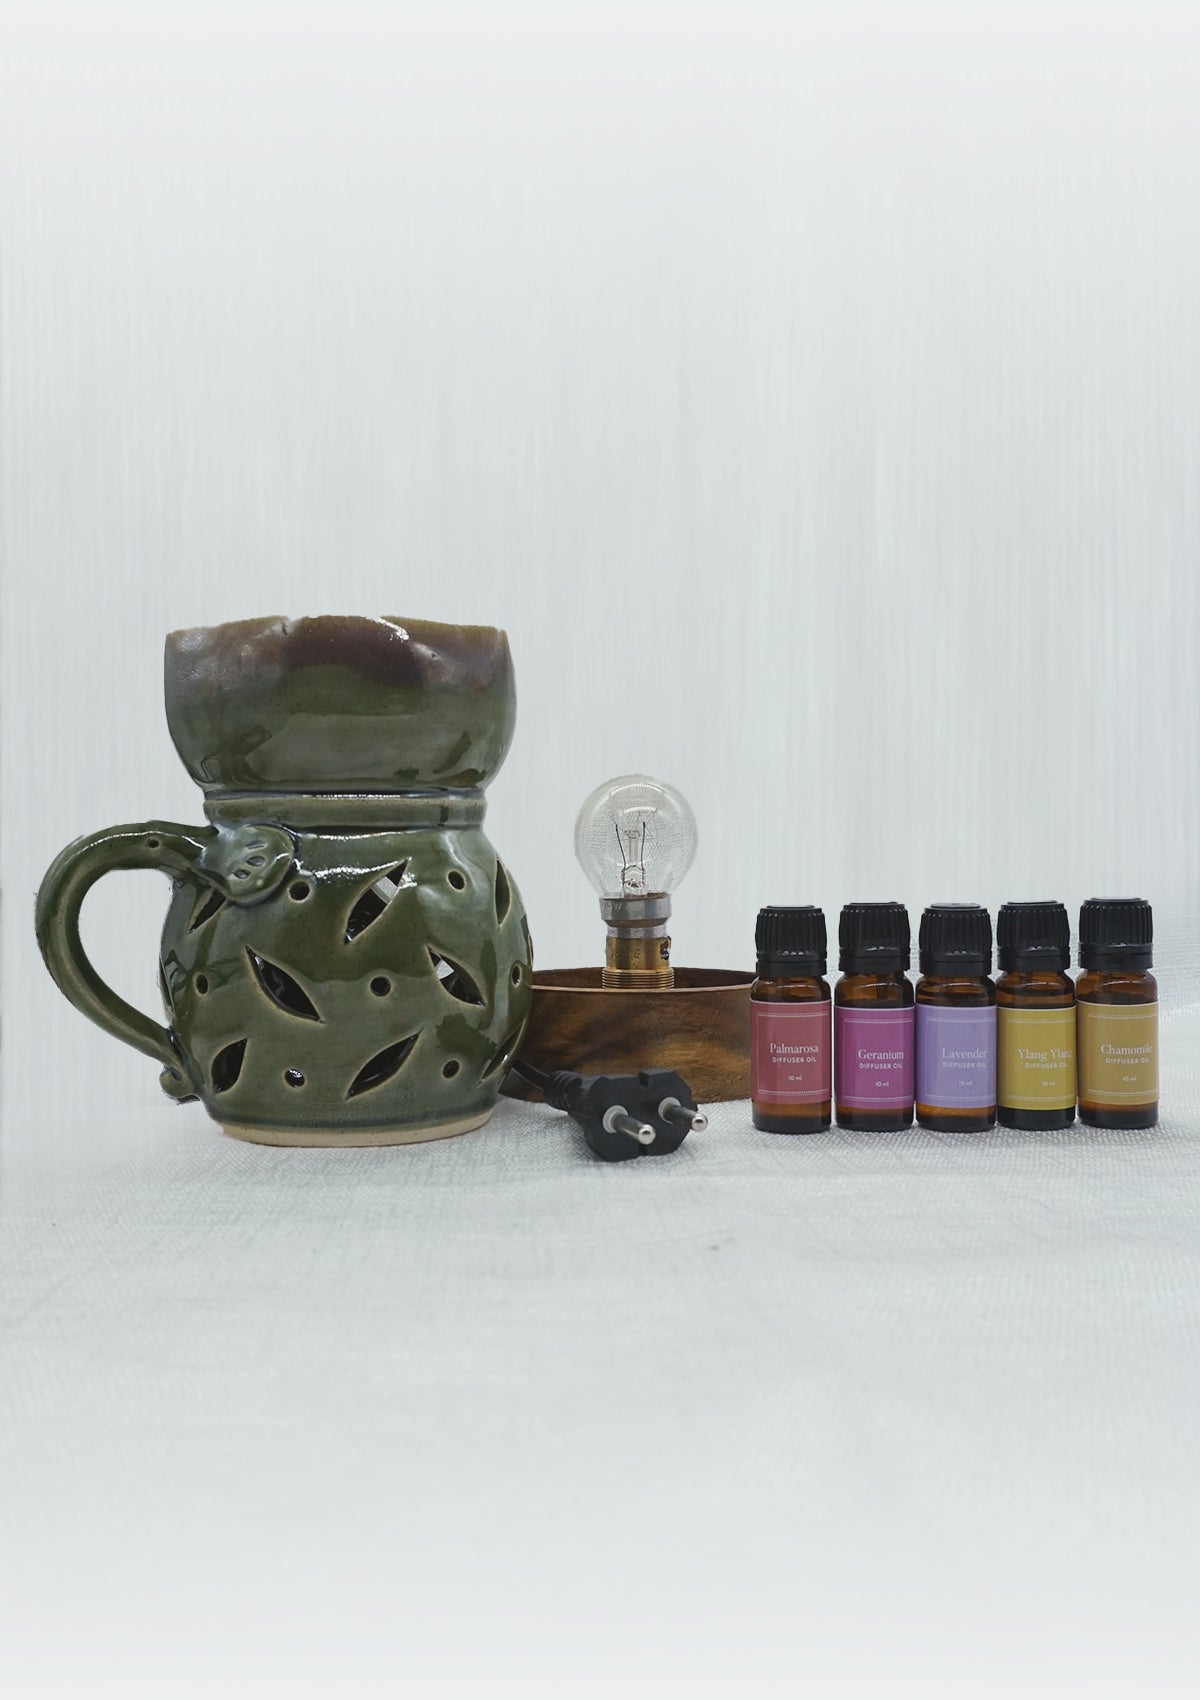 IshqME MeTime Aroma Kit: Electric Diffuser with Relaxing Essential Oils - IshqMe